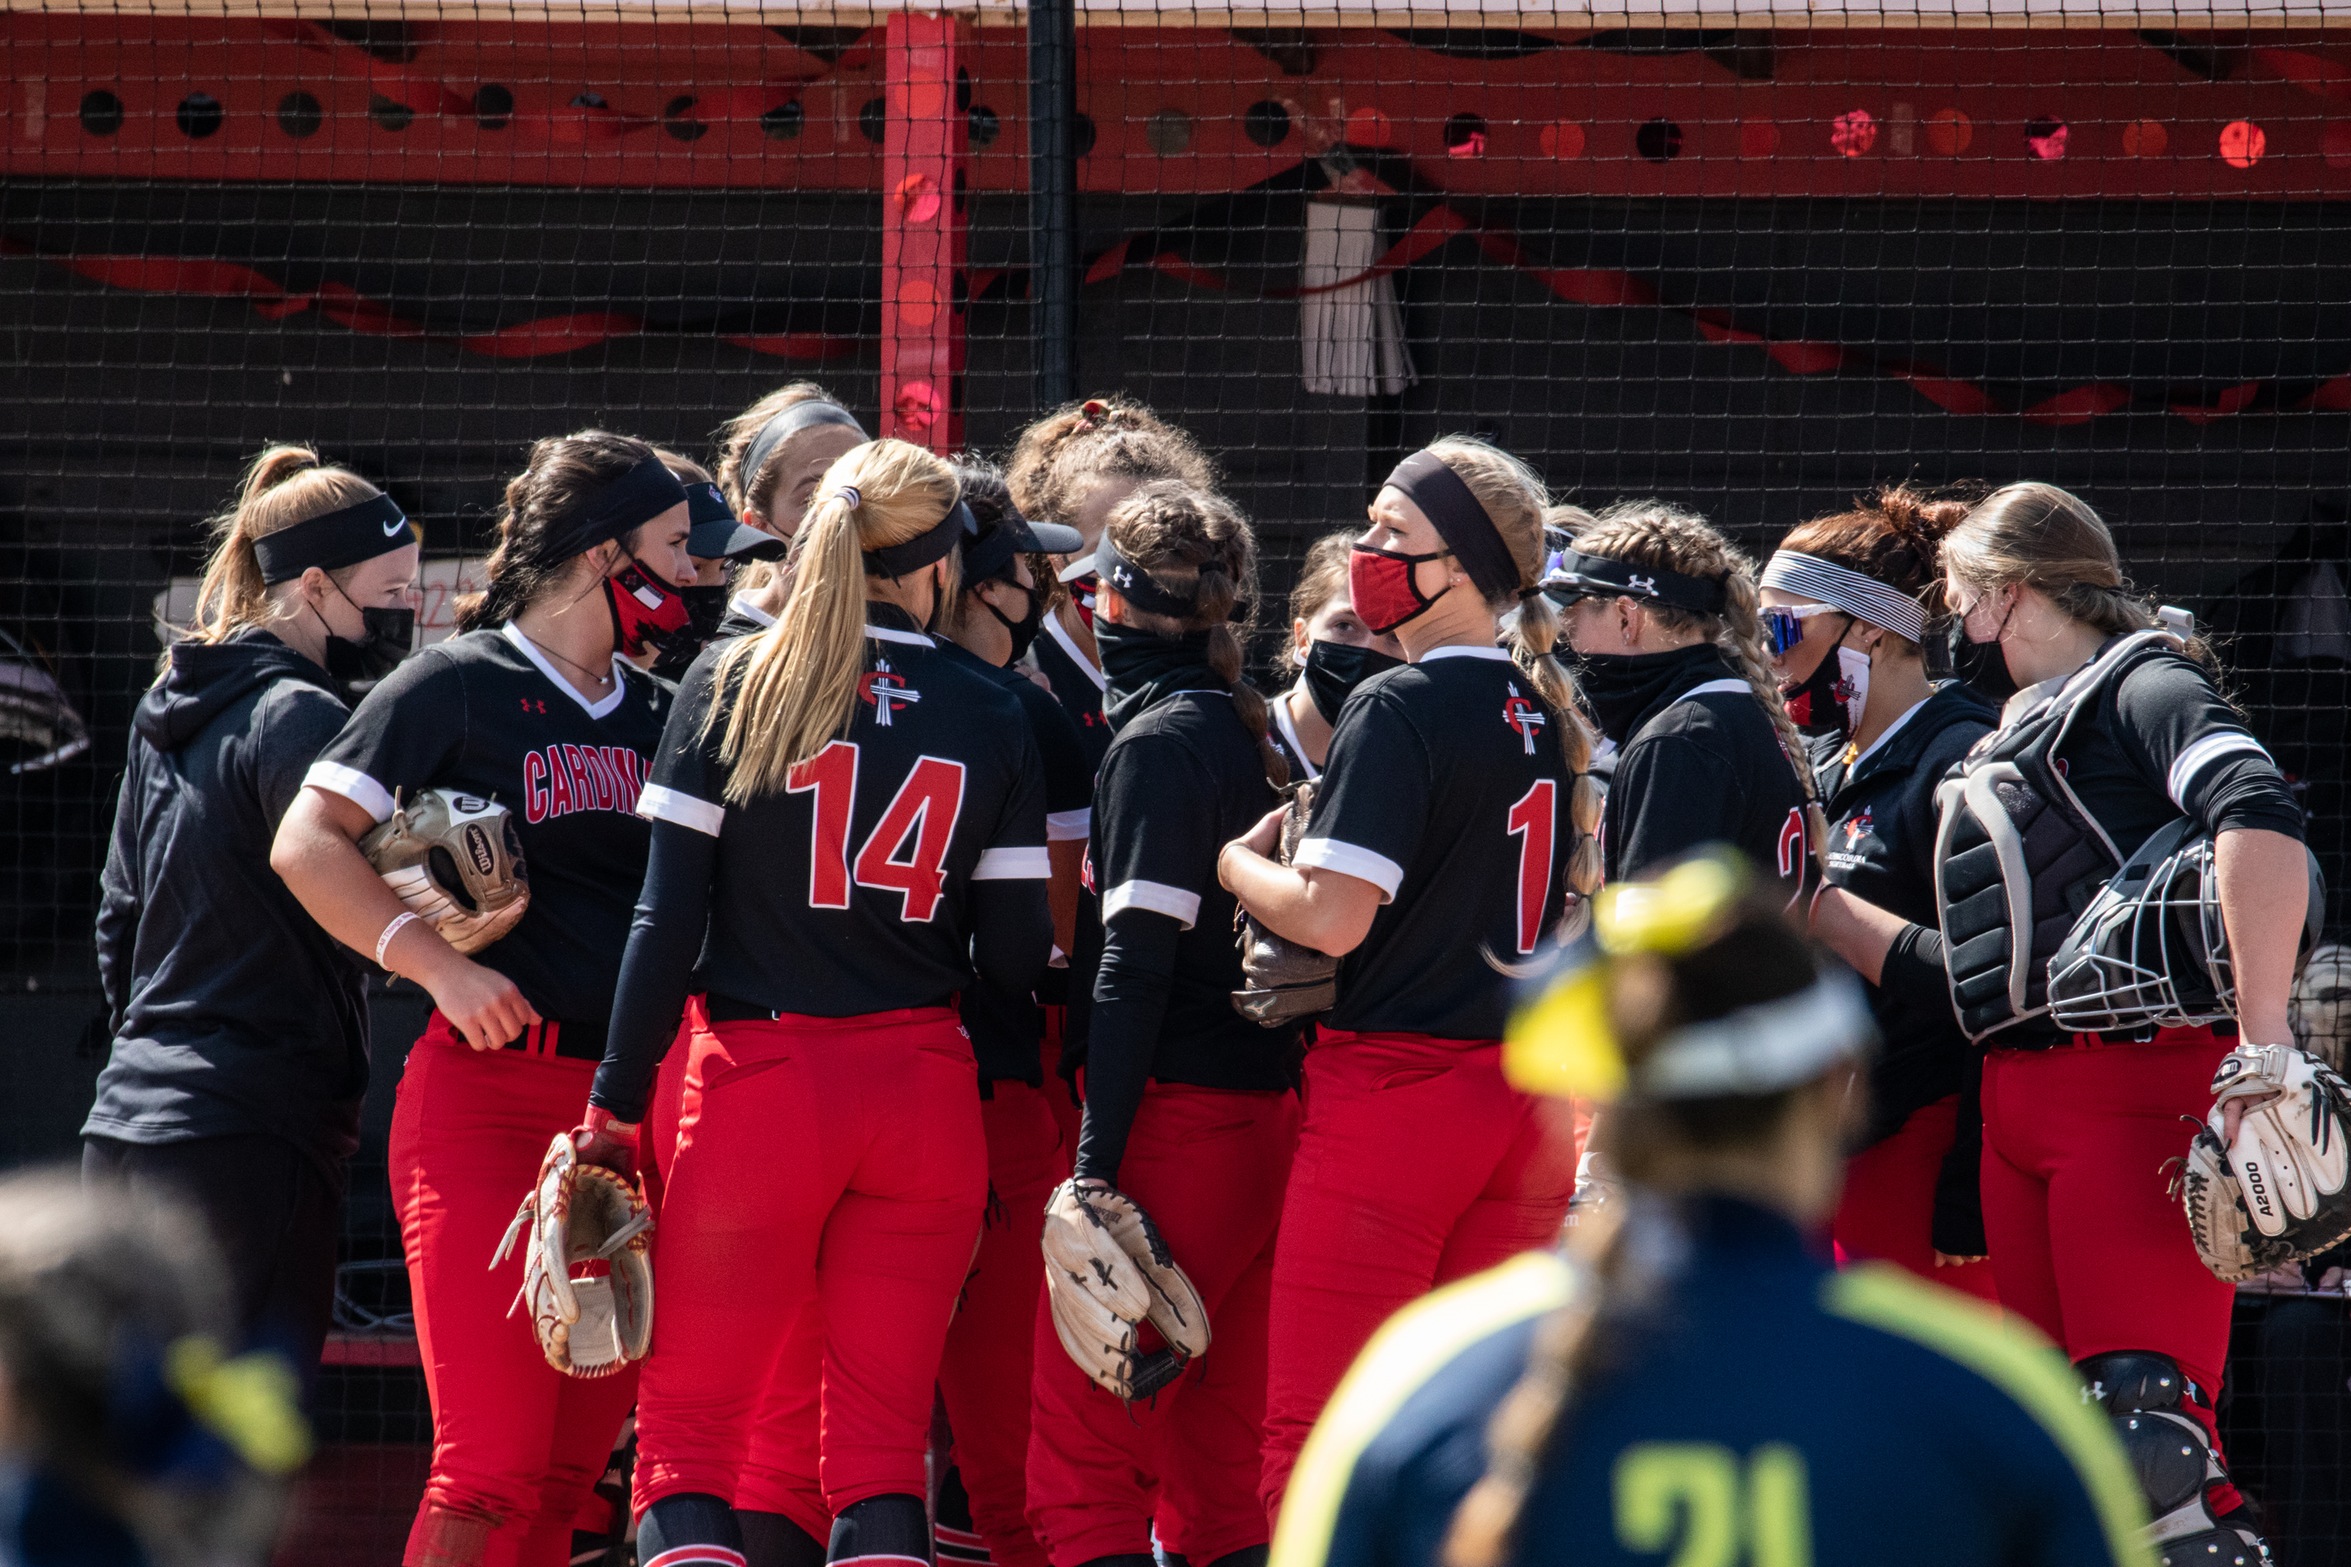 Season Preview: Softball looks to build on last year's success